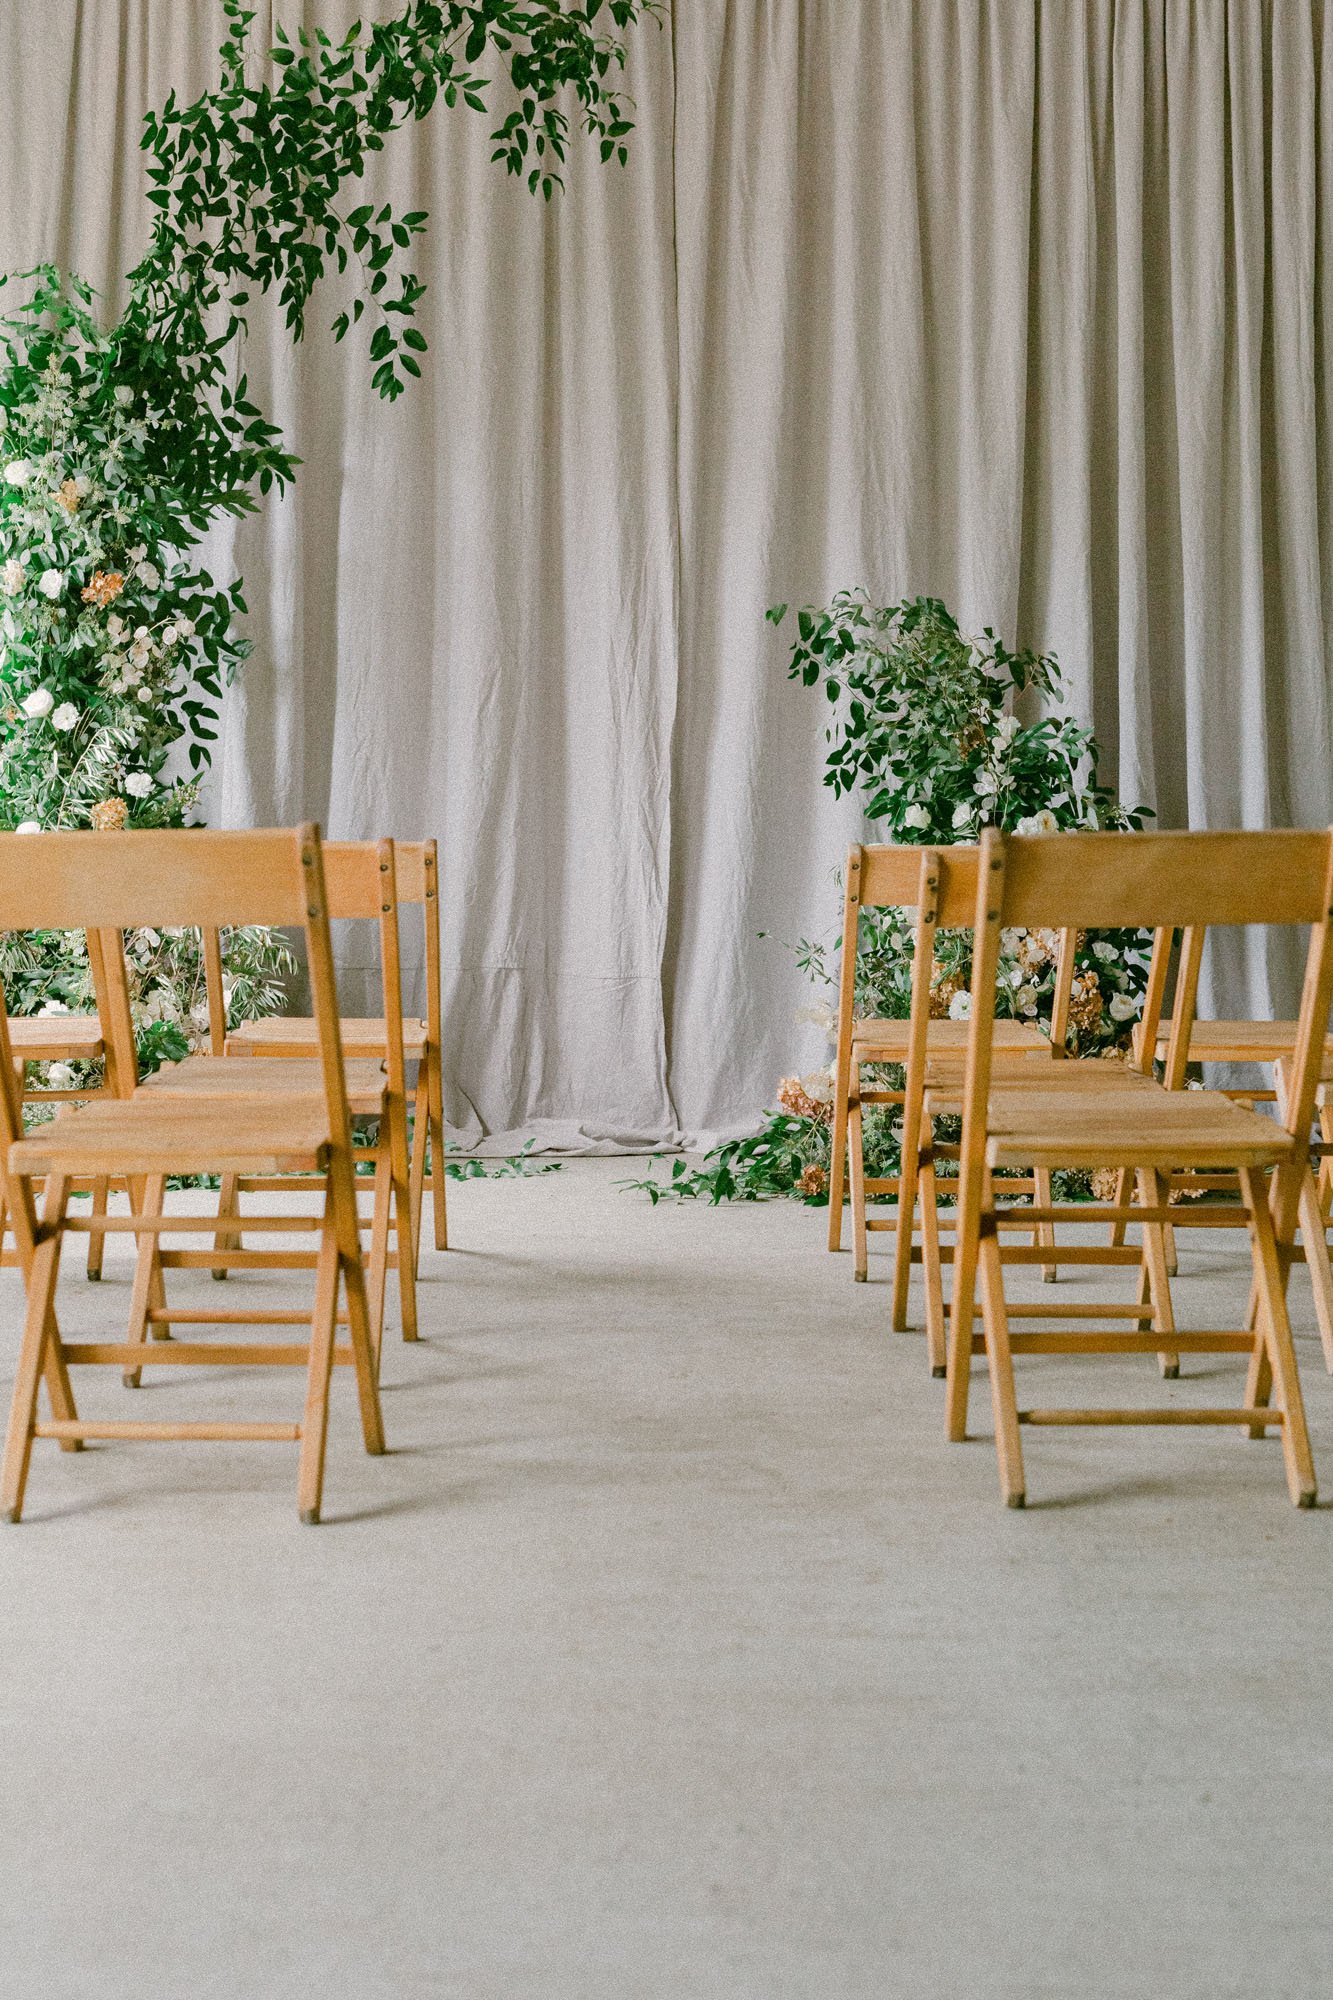  A lovely and intimate ceremony setup with worn wooden folding chairs, draped linen backdrop, and wild greenery arbor installation 